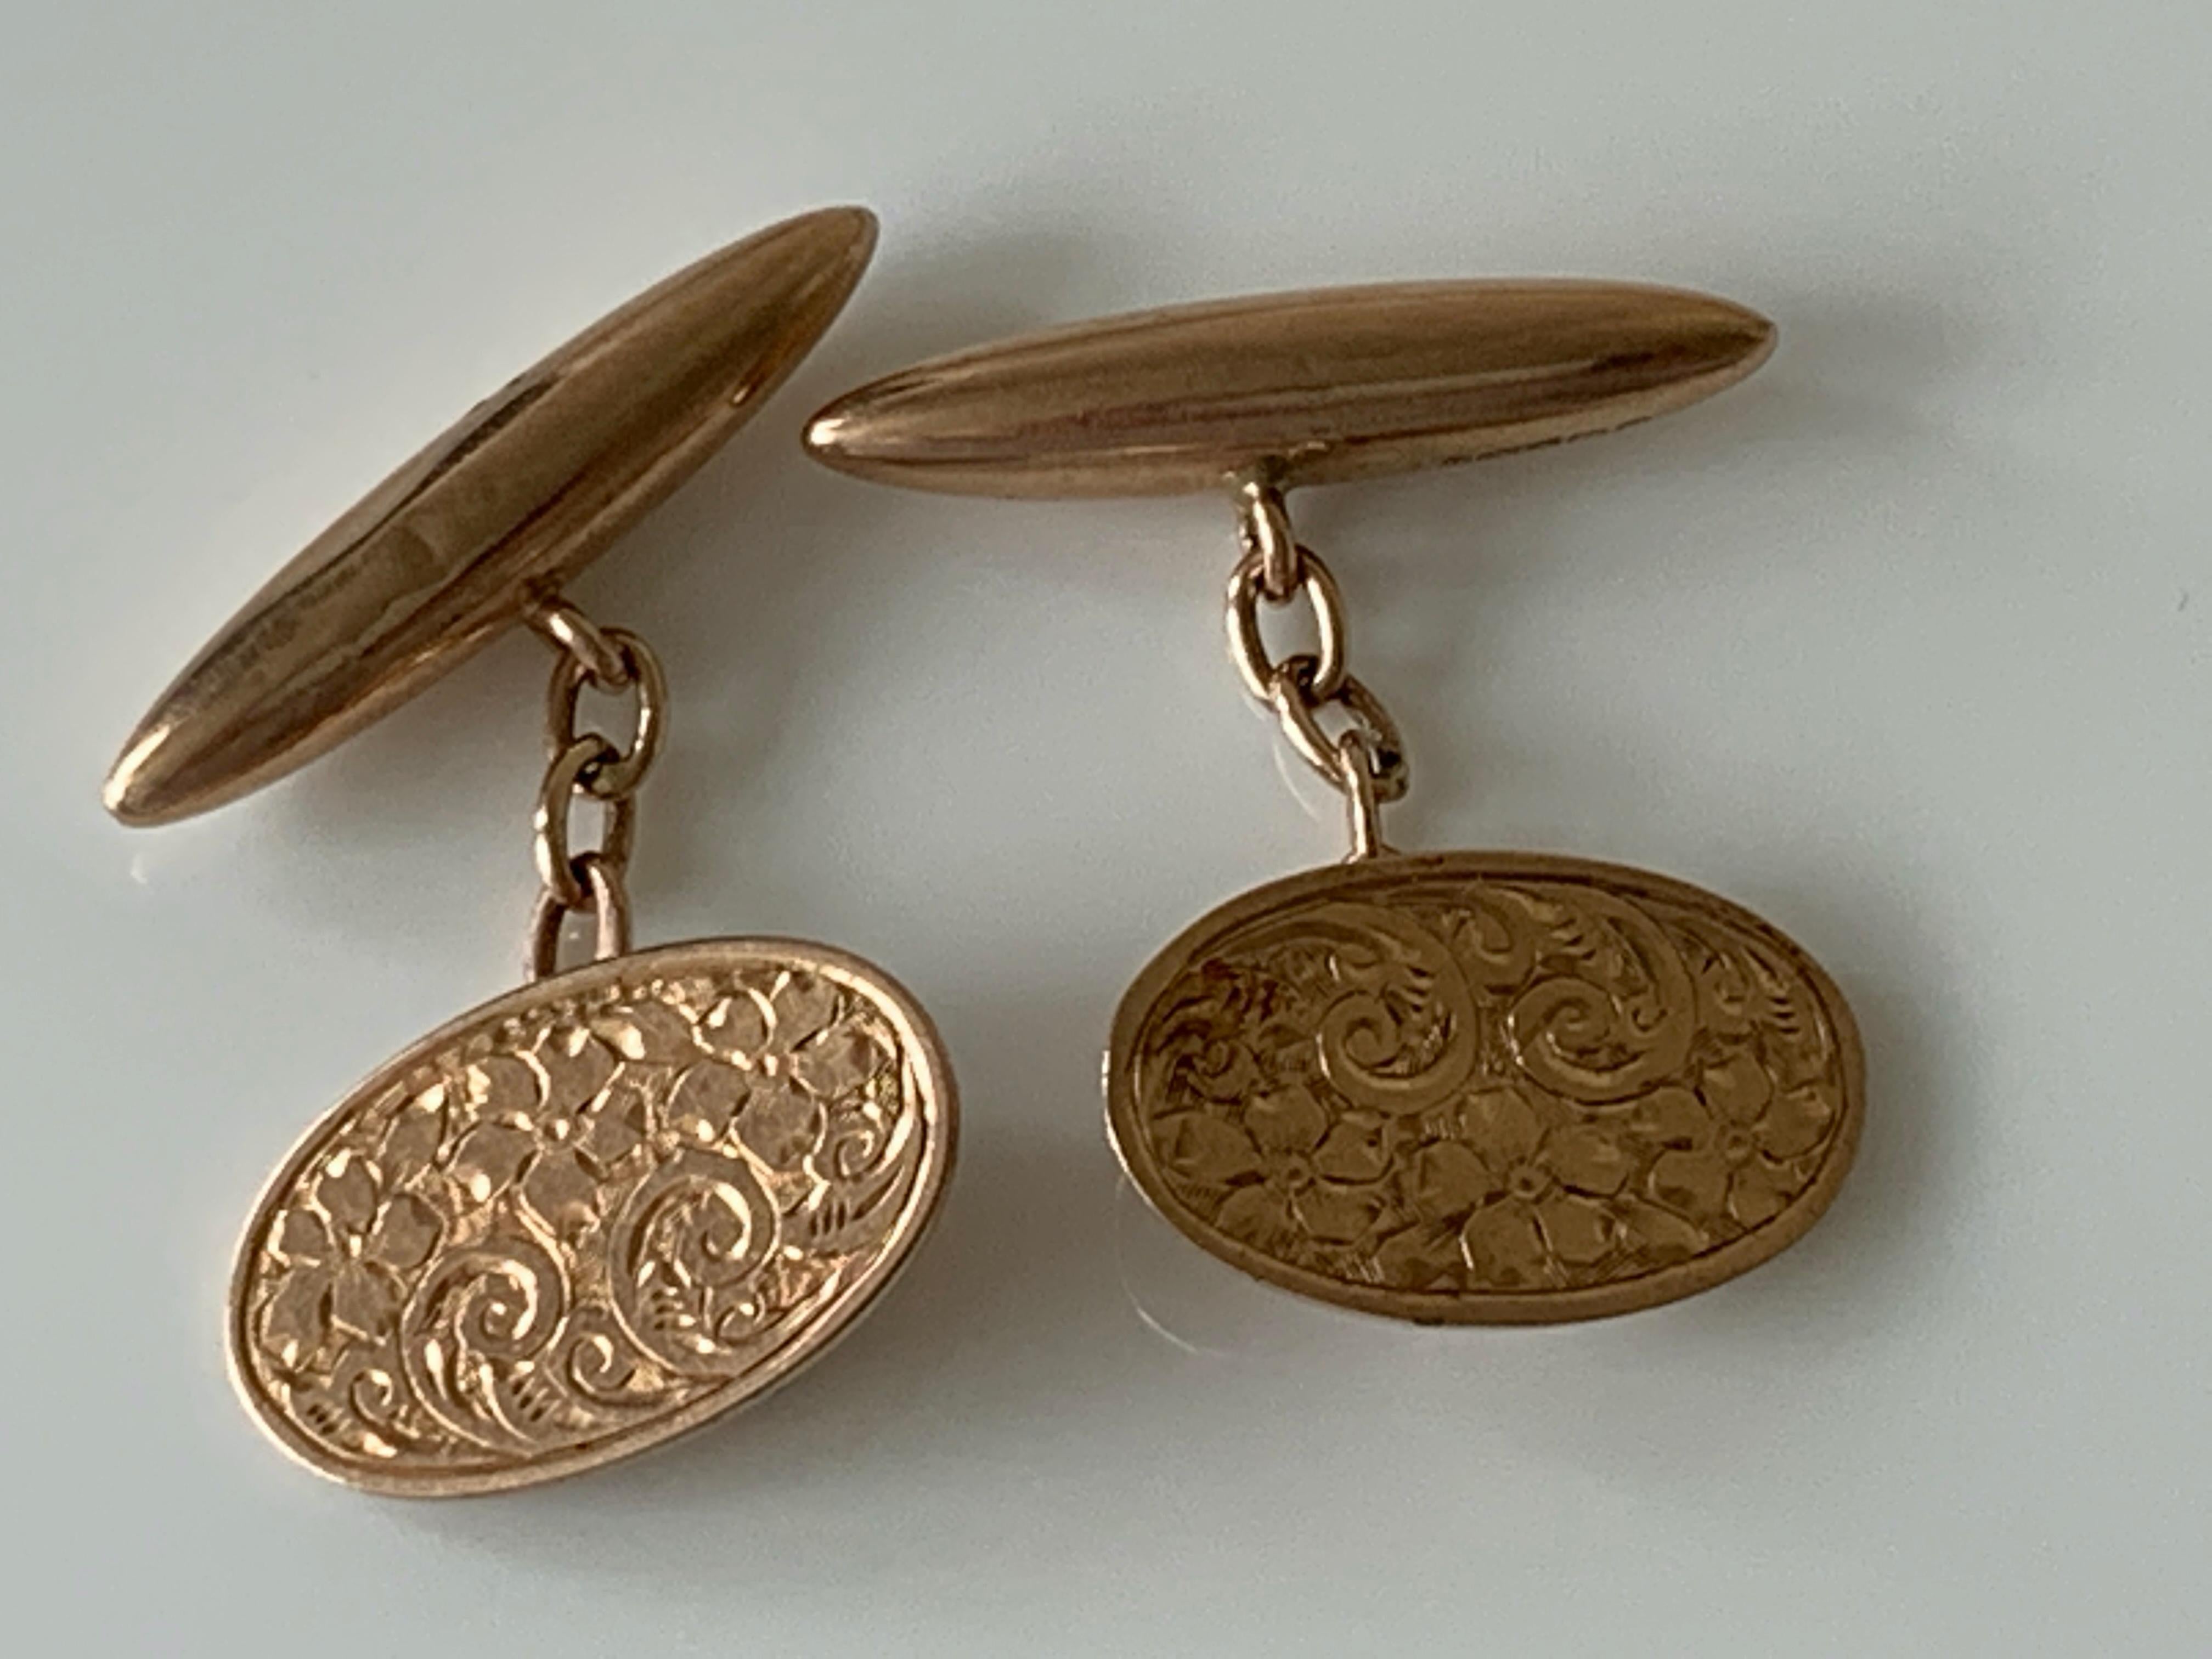 Antique Rose Gold Cufflinks 
with Engraved Foliage Front decoration
torpedo backs have hallmarks 
one set is very faded the other very clear
-Birmingham 1886
also the chains are hallmarked 9 375 